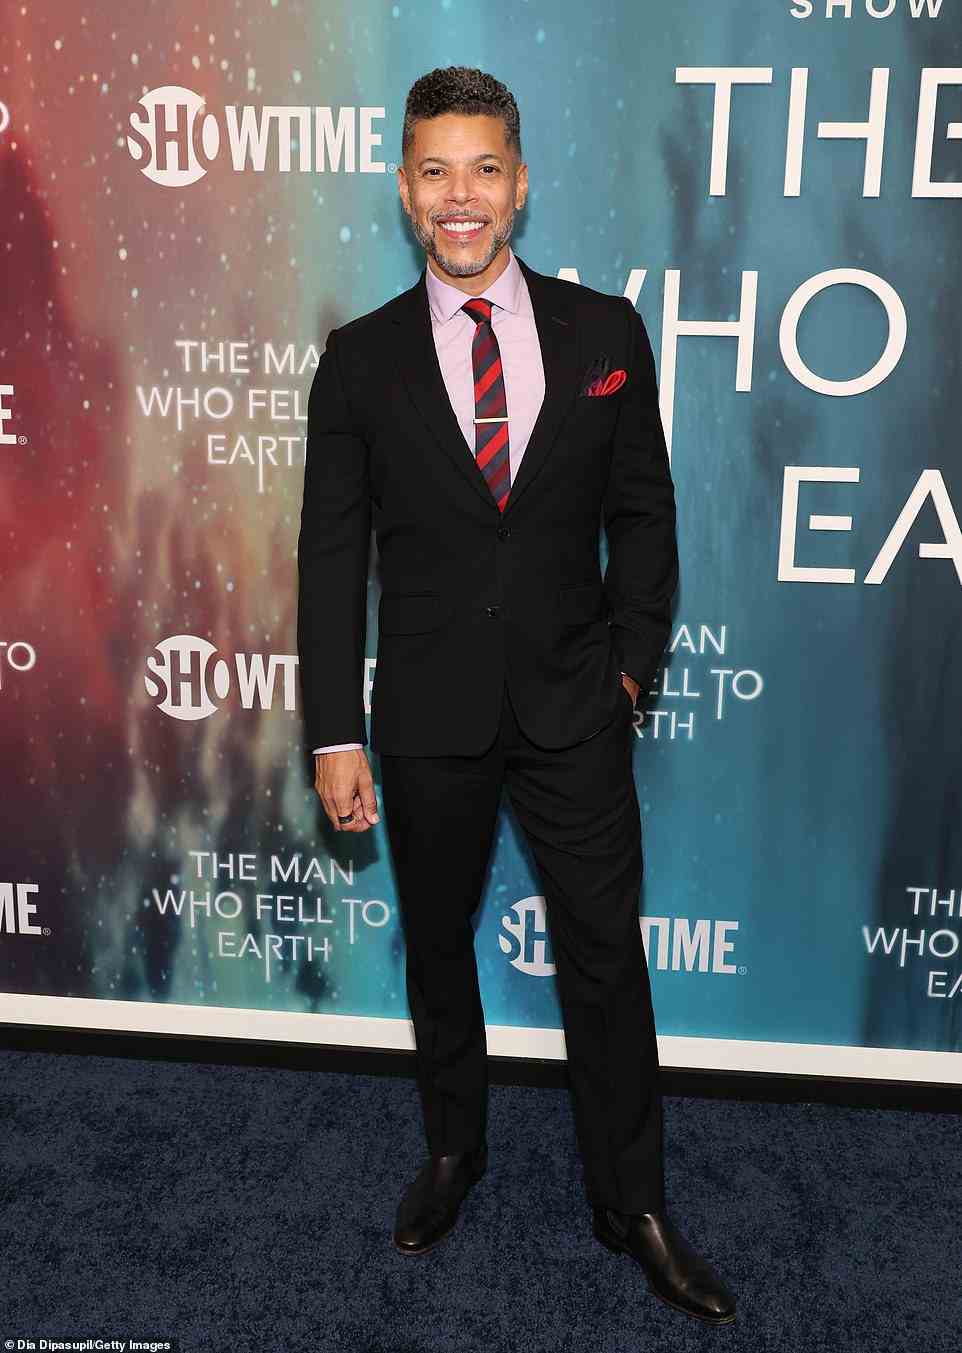 Silver fox! Wilson Cruz supported Kurtzman at the premiere because he's also the co-creator of Star Trek: Discovery, in which Wilson plays medical officer Hugh Culber